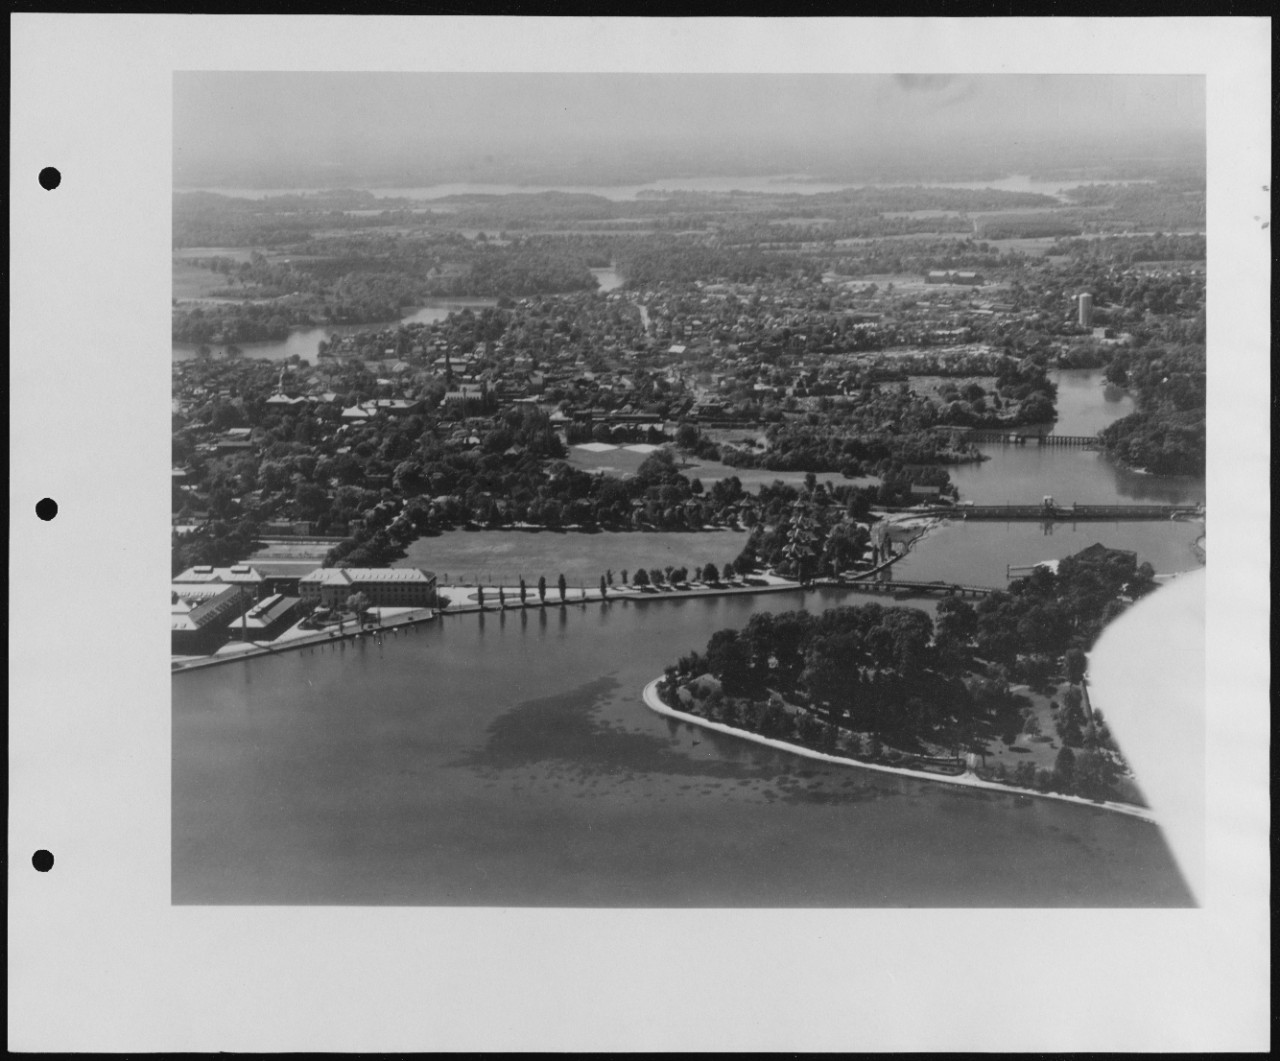 Aerial view of U.S. Naval Air Station, Naval Academy looking Southwest, Anacostia, Washington, D.C.